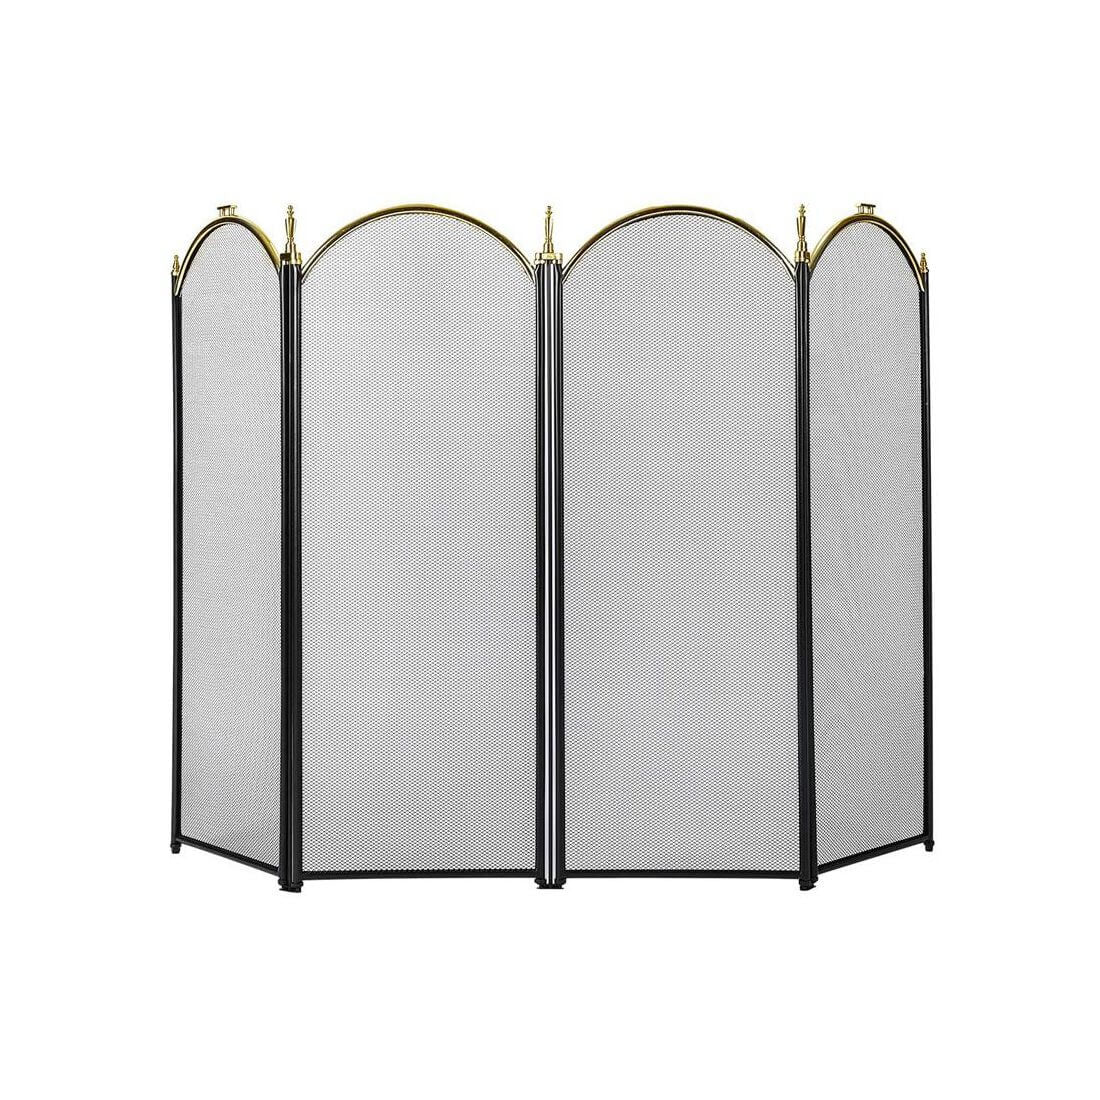 VIVOHOME 4 Panel 51.5 x 32 Inch Fireplace Screen Mesh Baby Safe Proof Fence Spark Guard Cover Ornate Wrought Iron Black Metal Fire Place Standing Gate